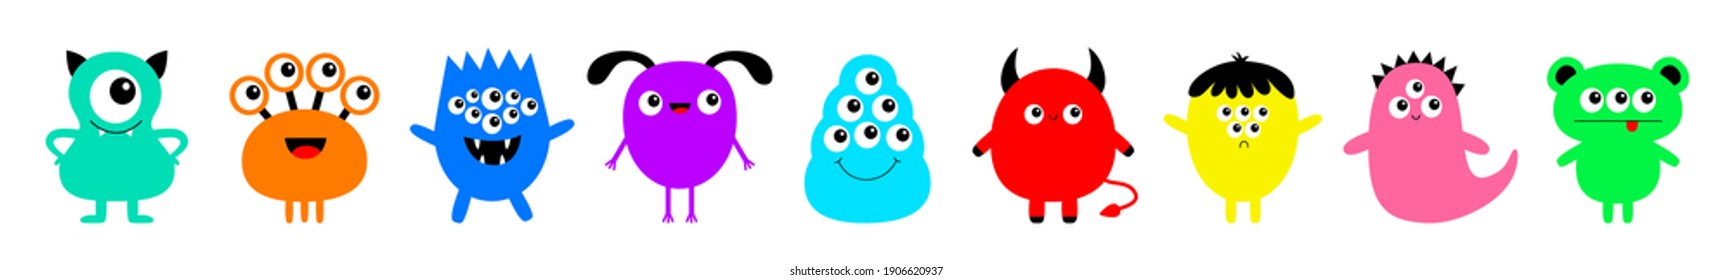 Happy Halloween. Monster set line. Cute kawaii cartoon colorful scary funny character icon. Funny collection. Eyes, tongue, hands, horns, fang teeth. White background. Isolated. Flat design. Vector